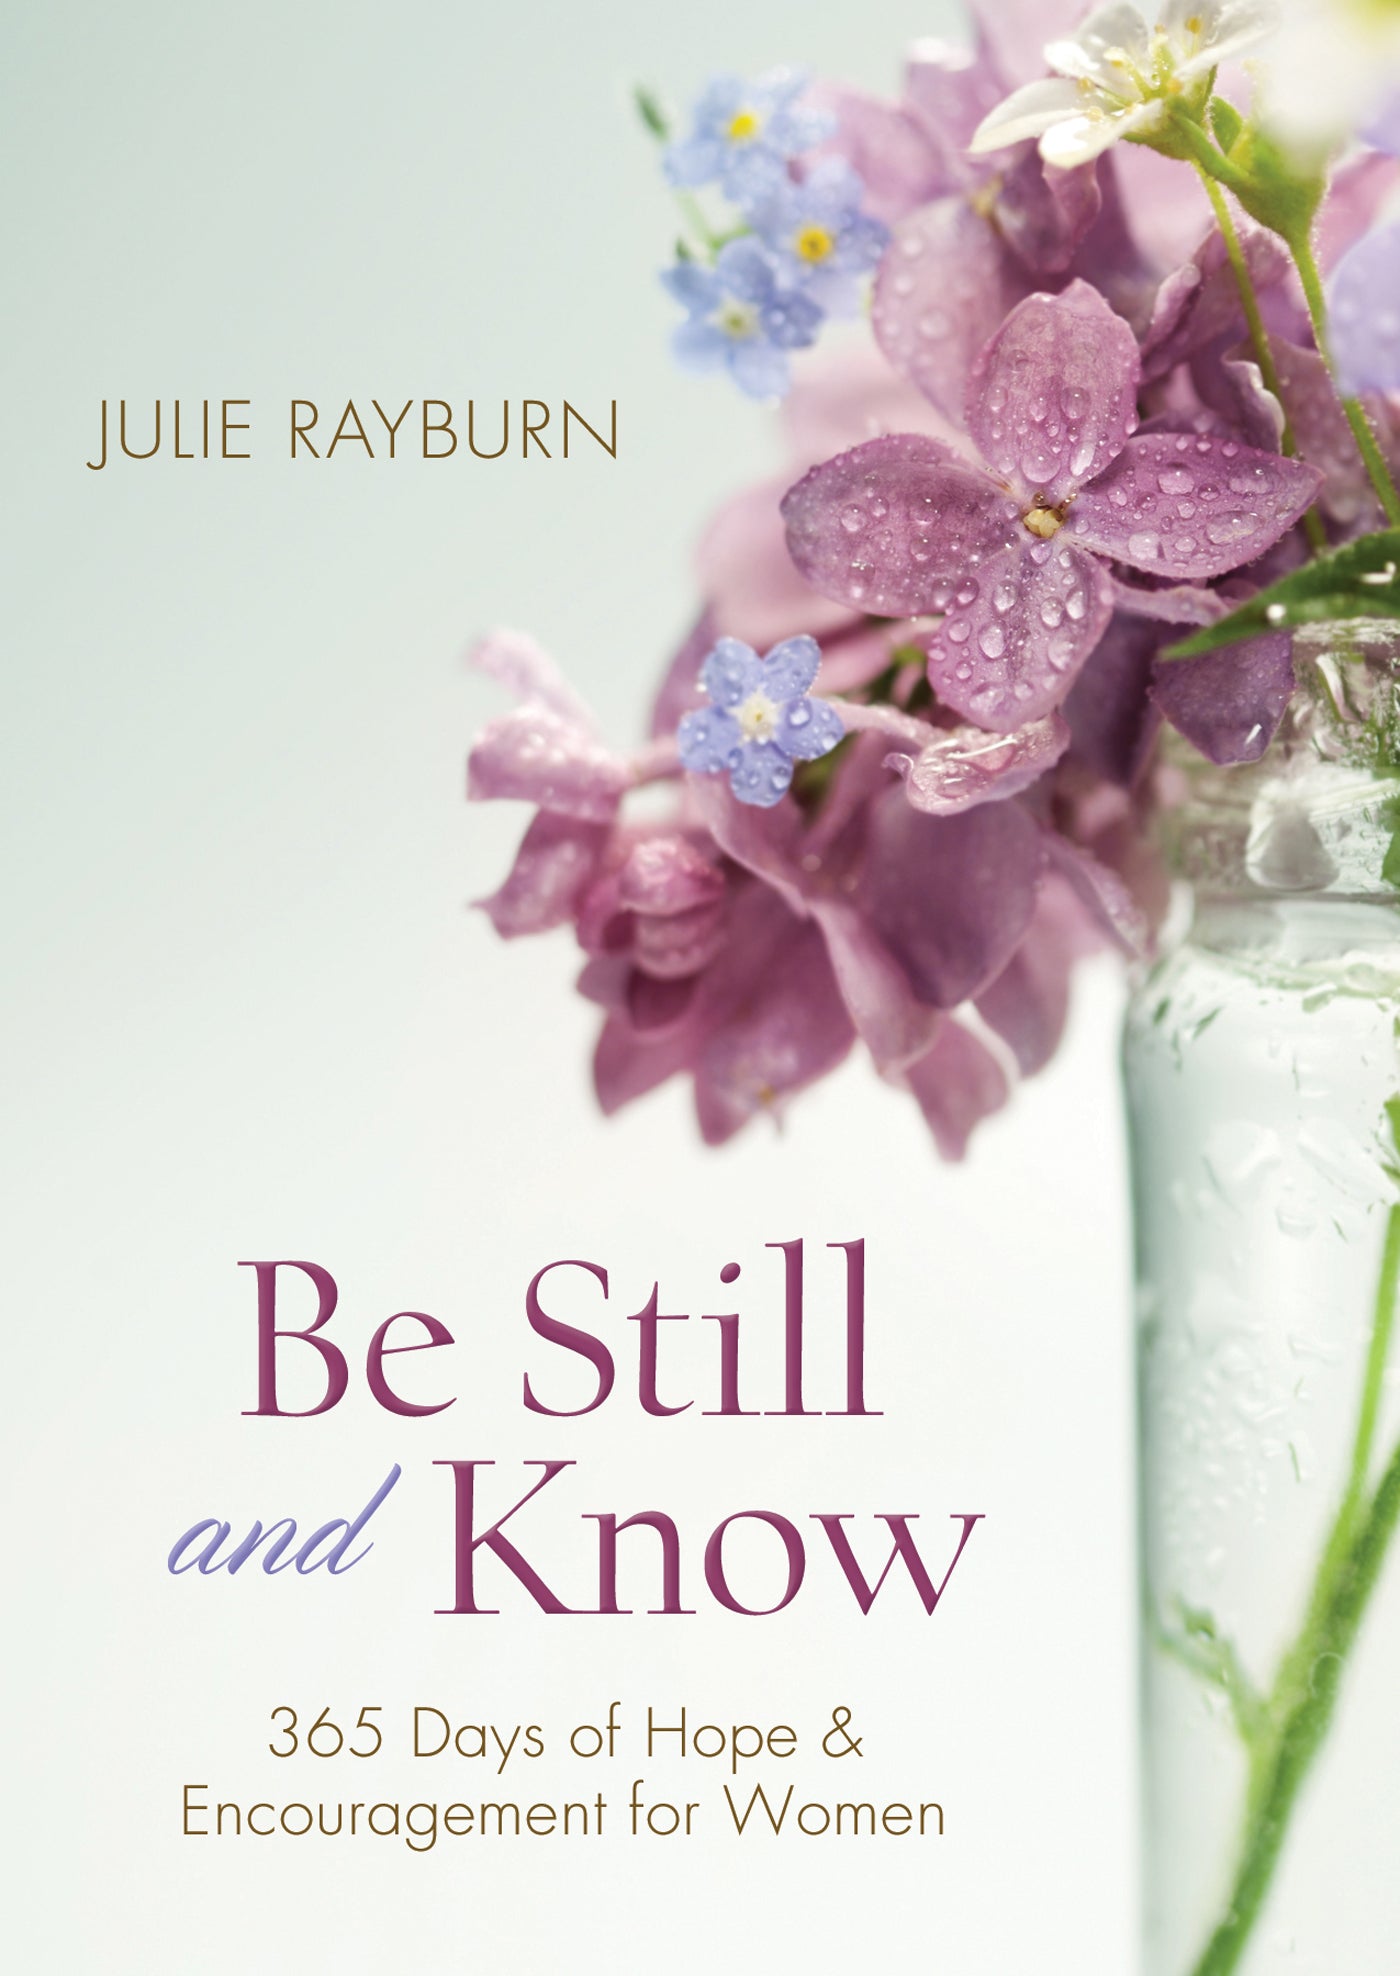 Be Still and Know - The Christian Gift Company